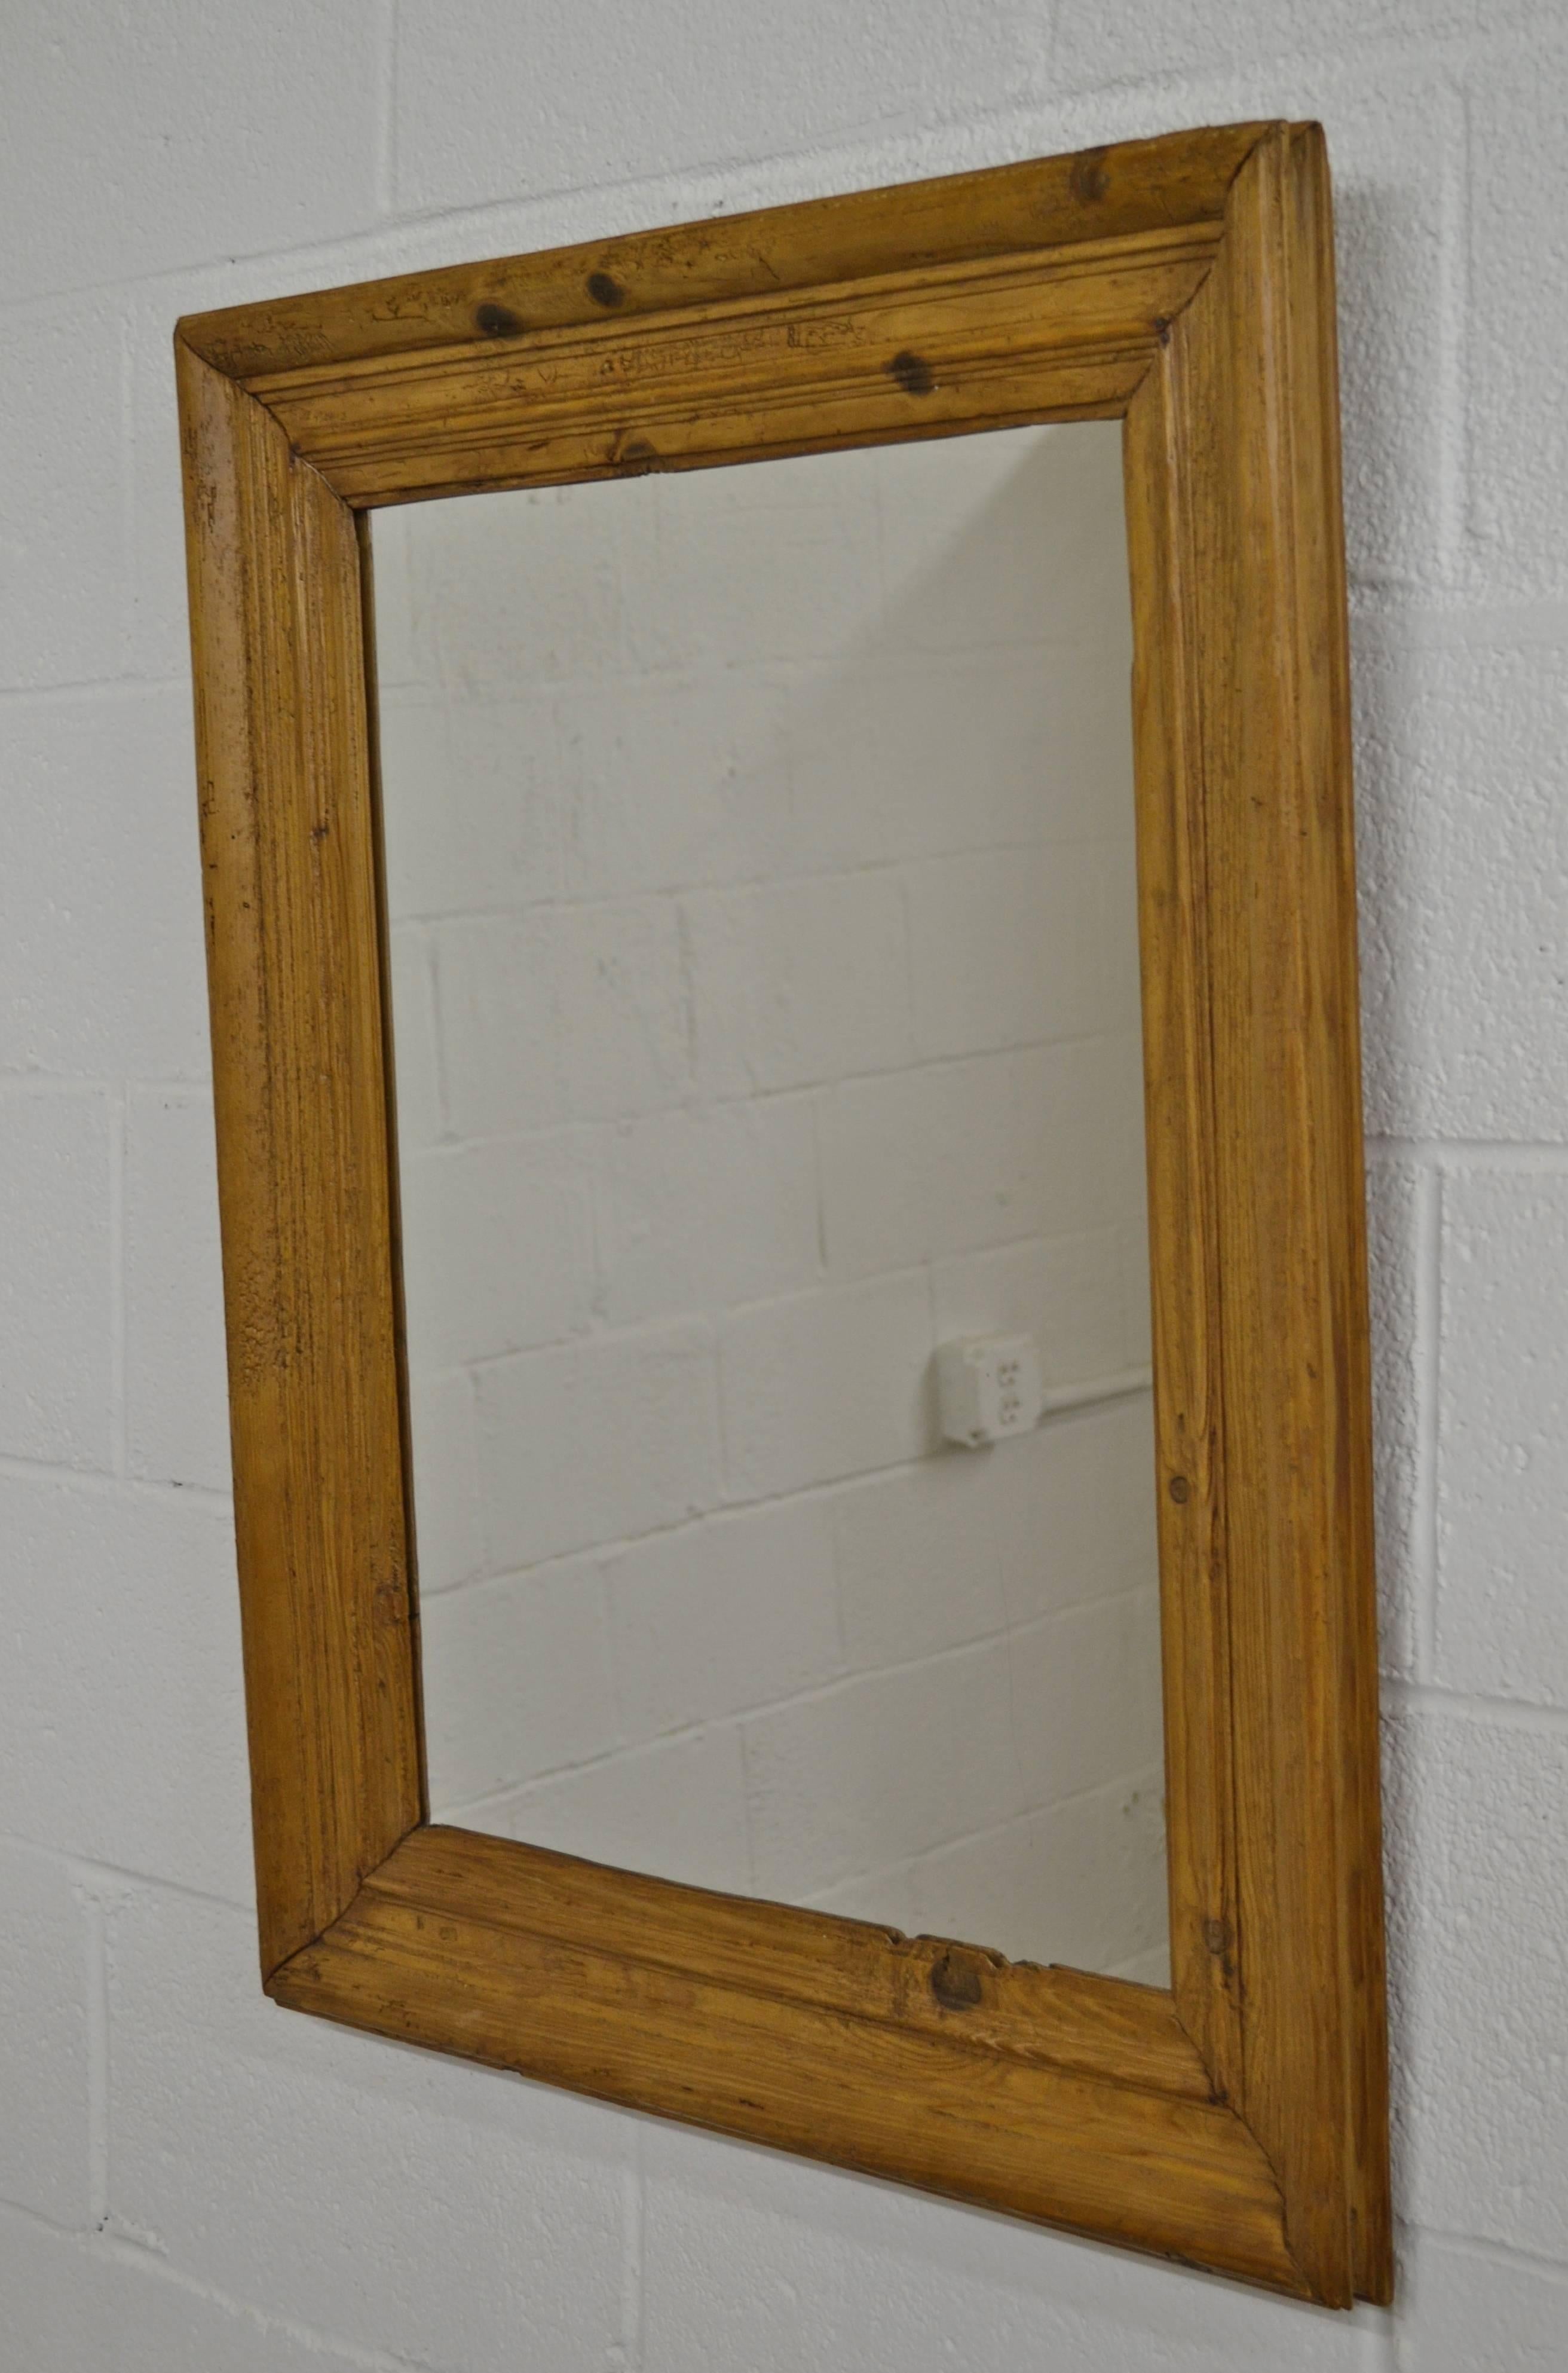 A delightfully rustic antique pine picture frame fitted with new mirror glass. Frame molding is 4.5